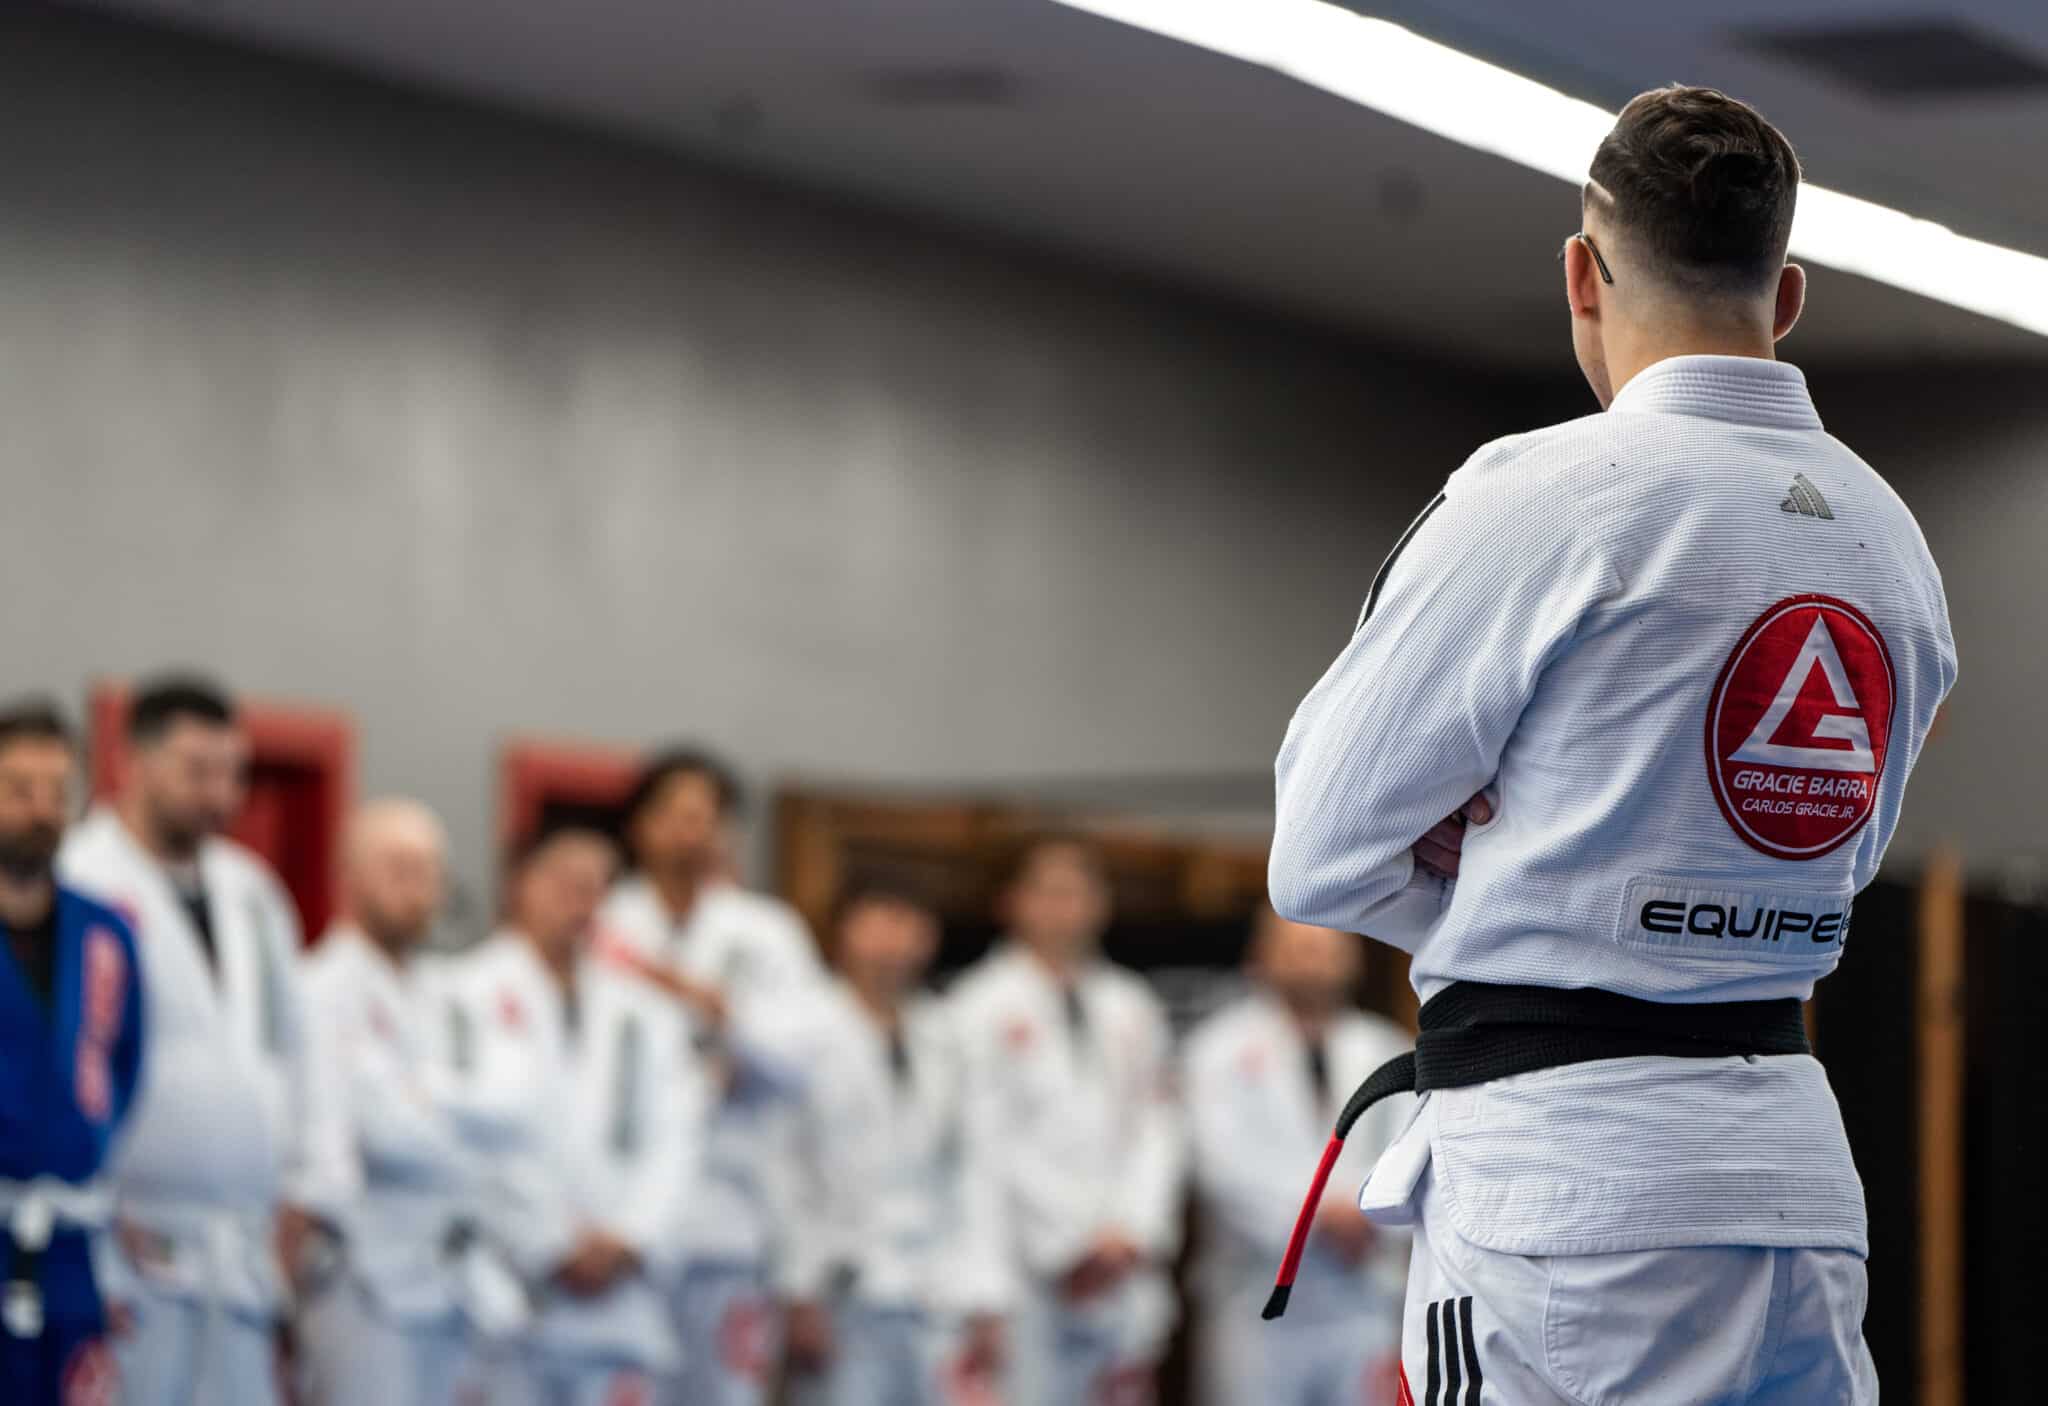 Coach Carlos was standing showing Gracie Barra logo on his back looking at the lined up students at Gracie Barra Salt Lake City